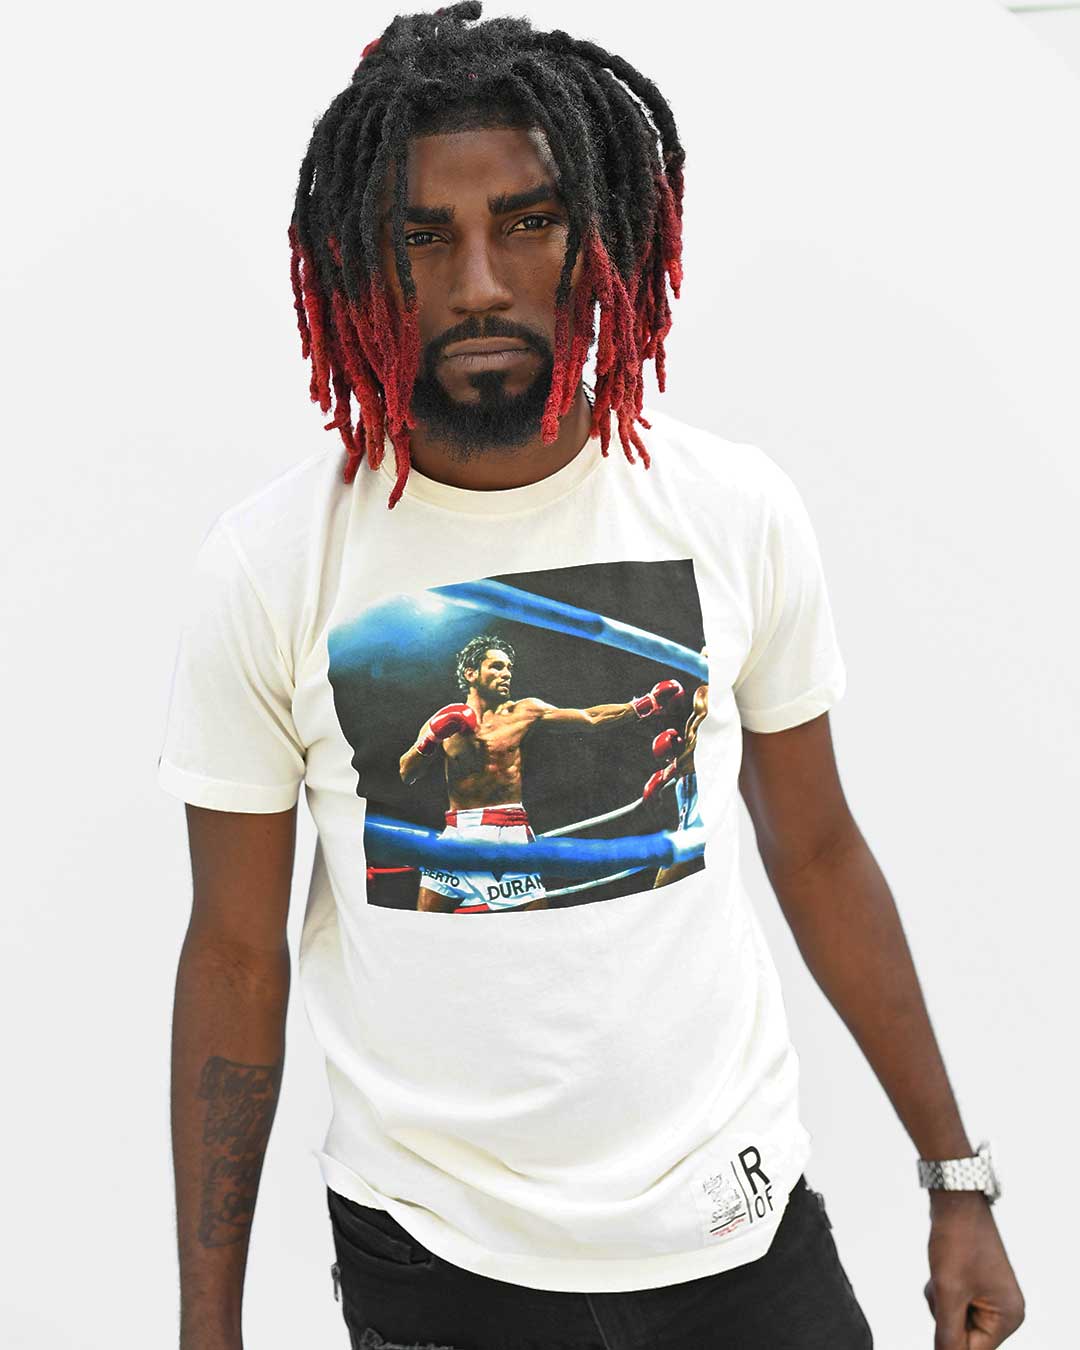 Duran Welterweight Champ Photo Tee - Roots of Fight